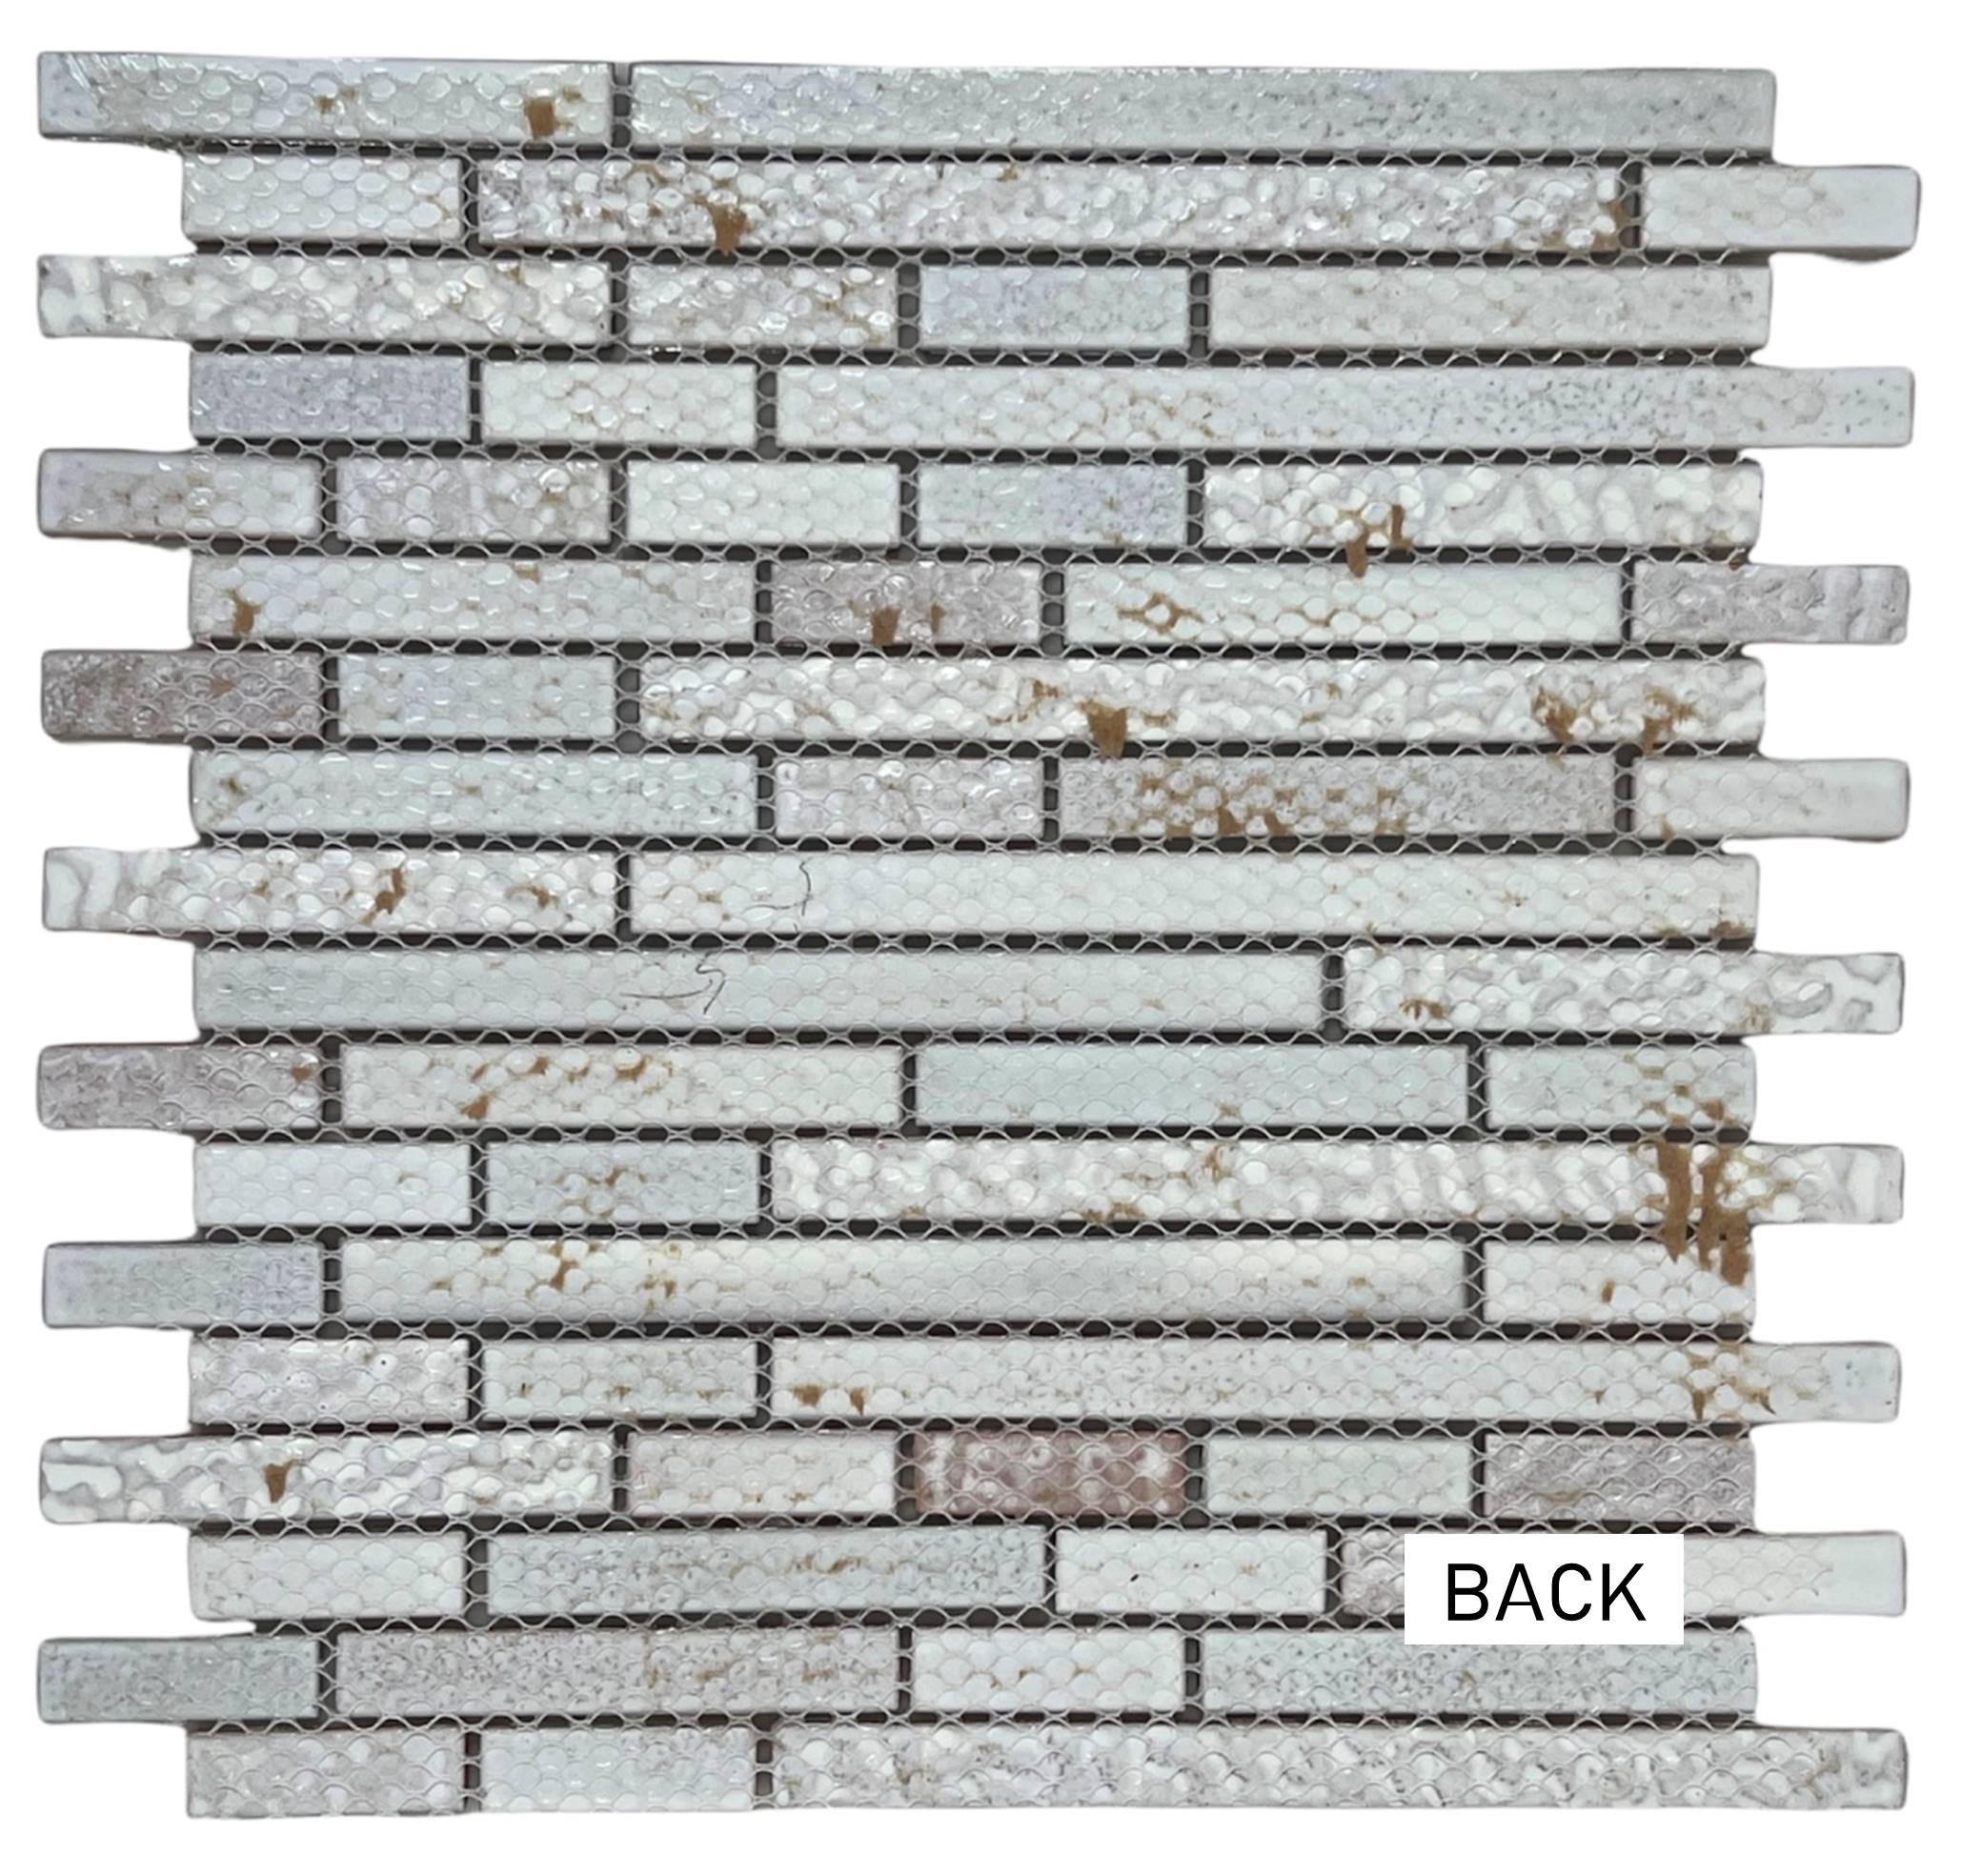 Premium Quality Copper & Gold Glass Mixed Random Pattern Mosaic Tile for Backsplash and Bathroom Wall Designed in Italy